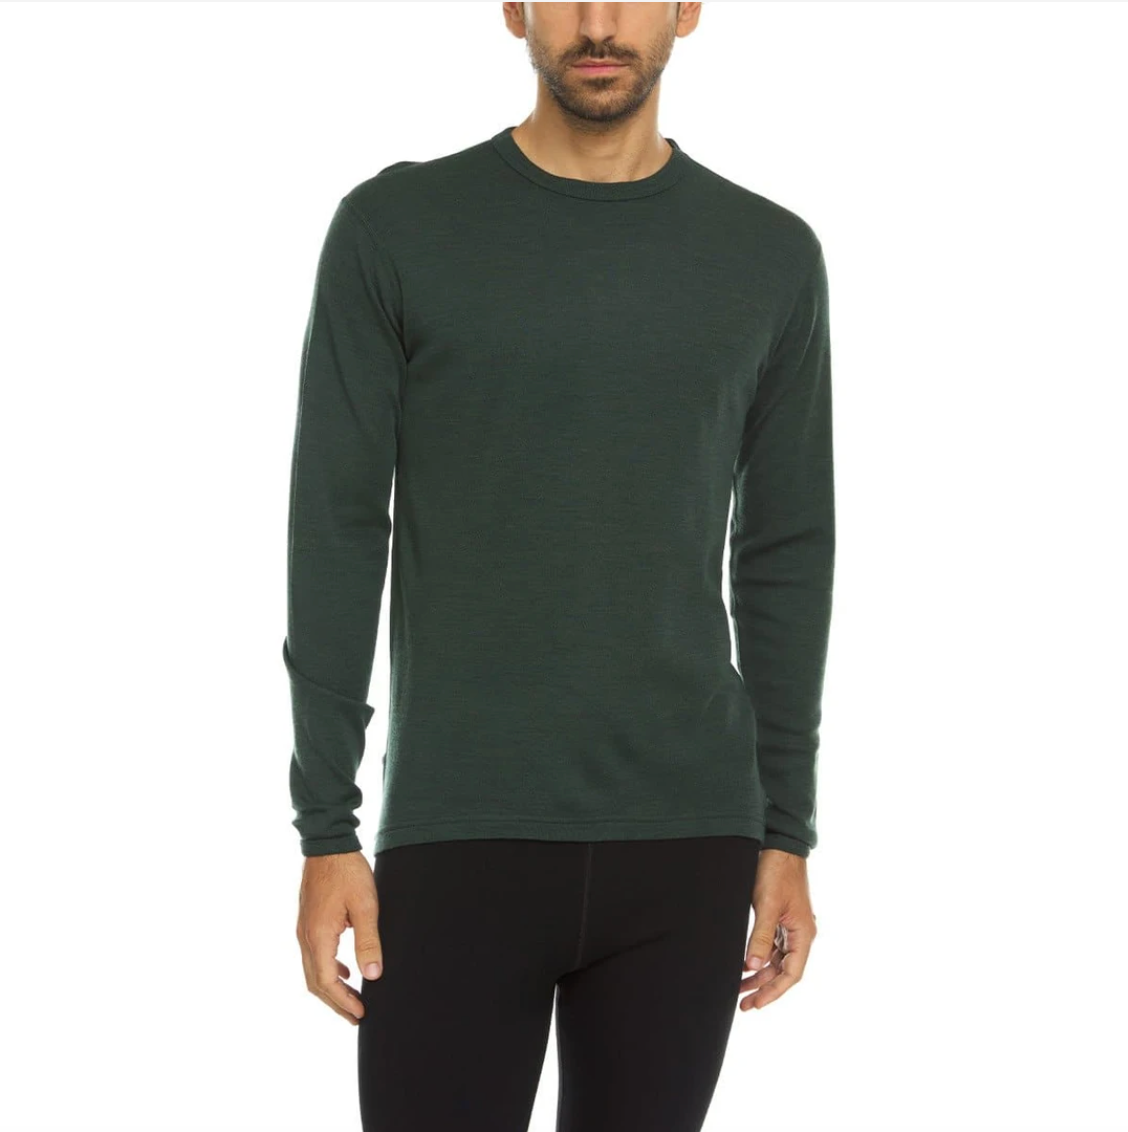 minus33 men's midweight wool crew in forest green on model front view